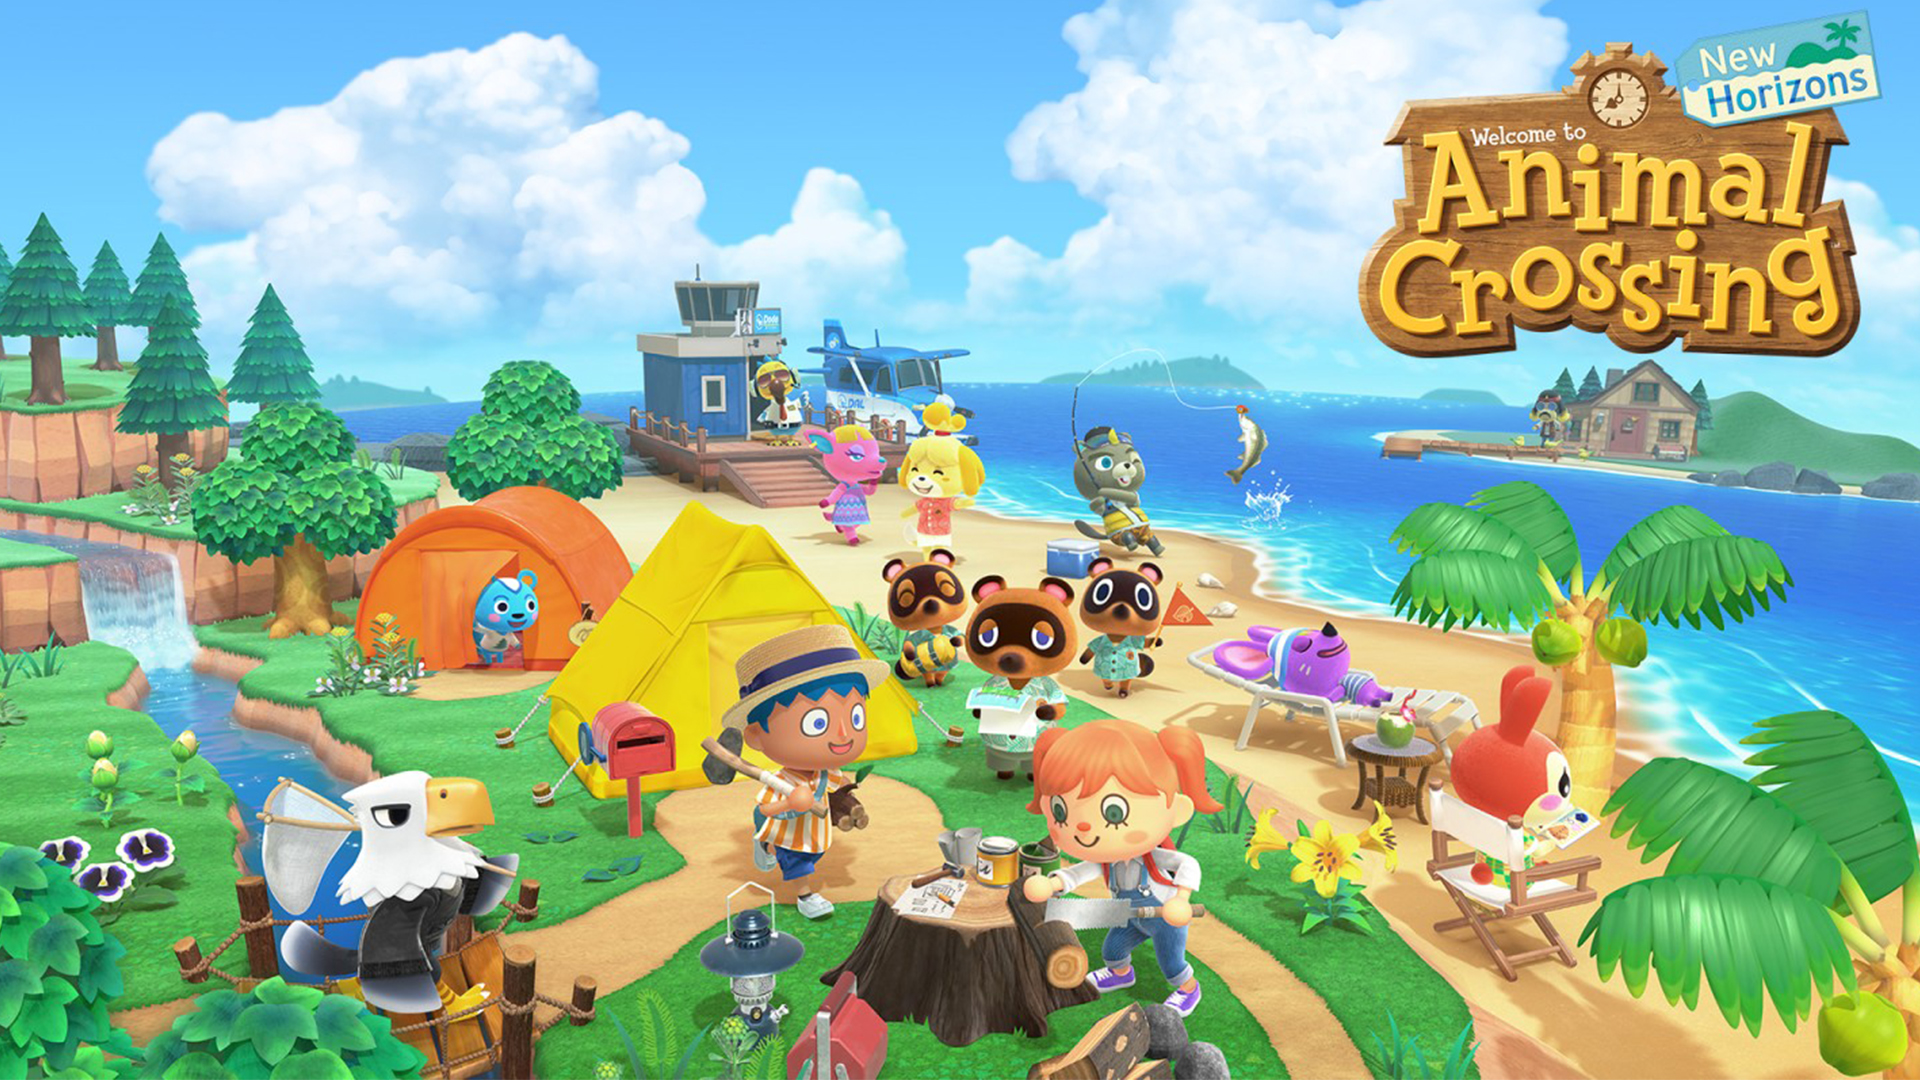 Animal Crossing: New Horizons is Nintendo's newest blockbuster and critique